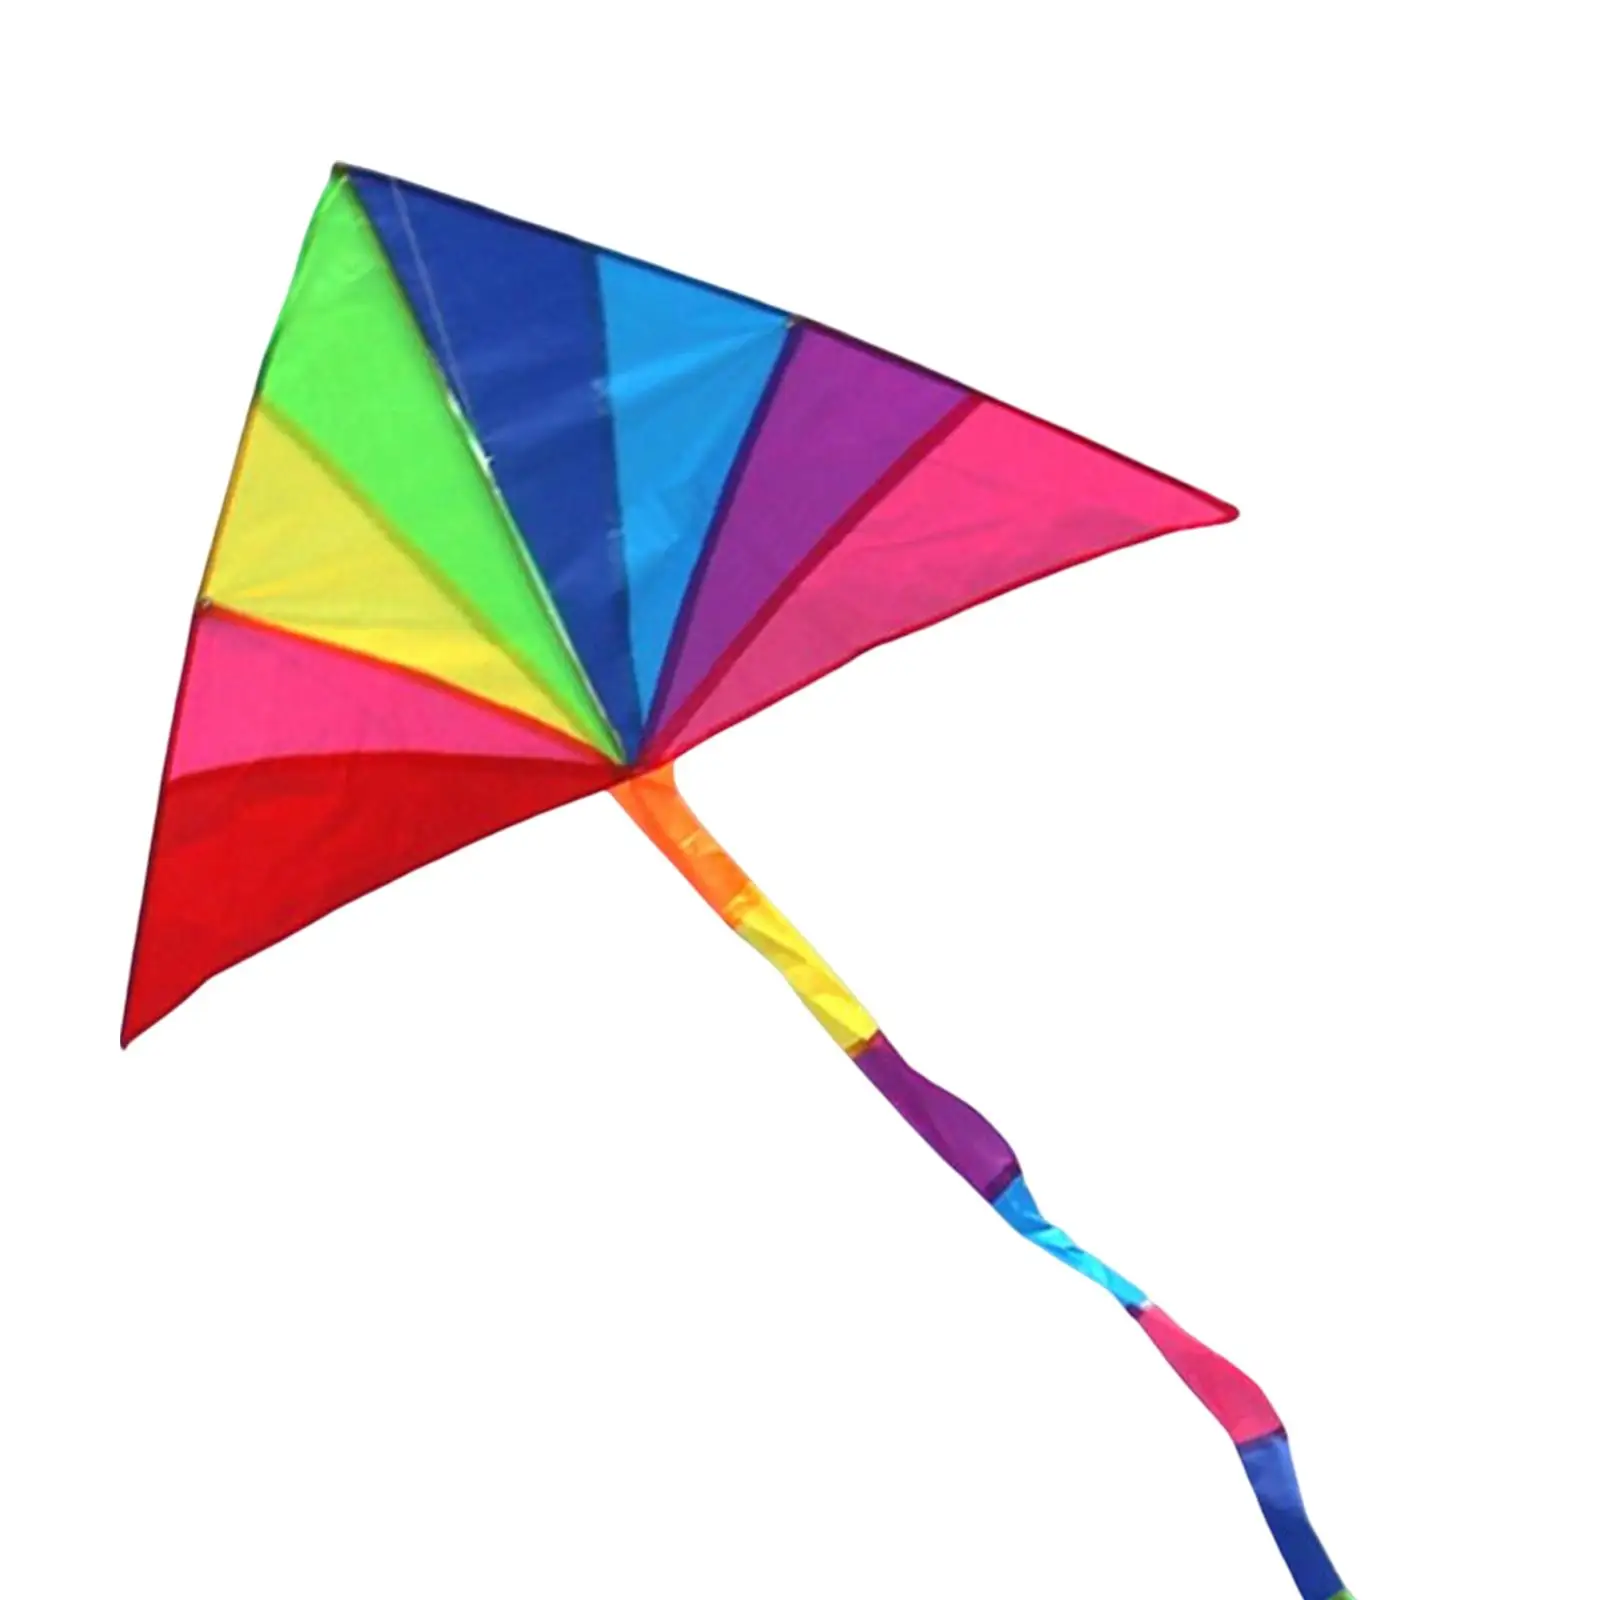 Giant Delta Kite with Tail Colorful for Sports Beginner Kids Adults